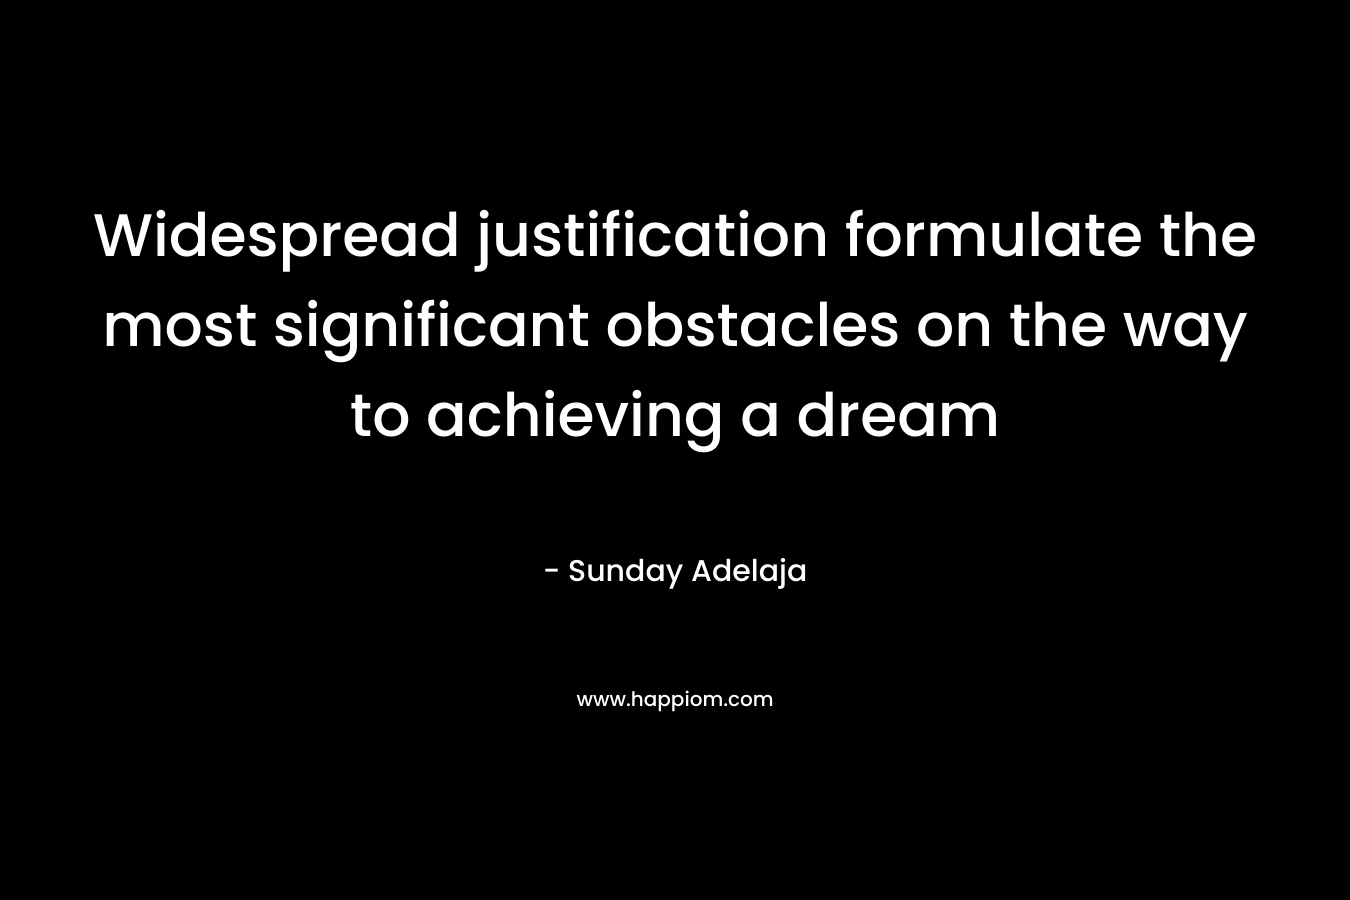 Widespread justification formulate the most significant obstacles on the way to achieving a dream – Sunday Adelaja